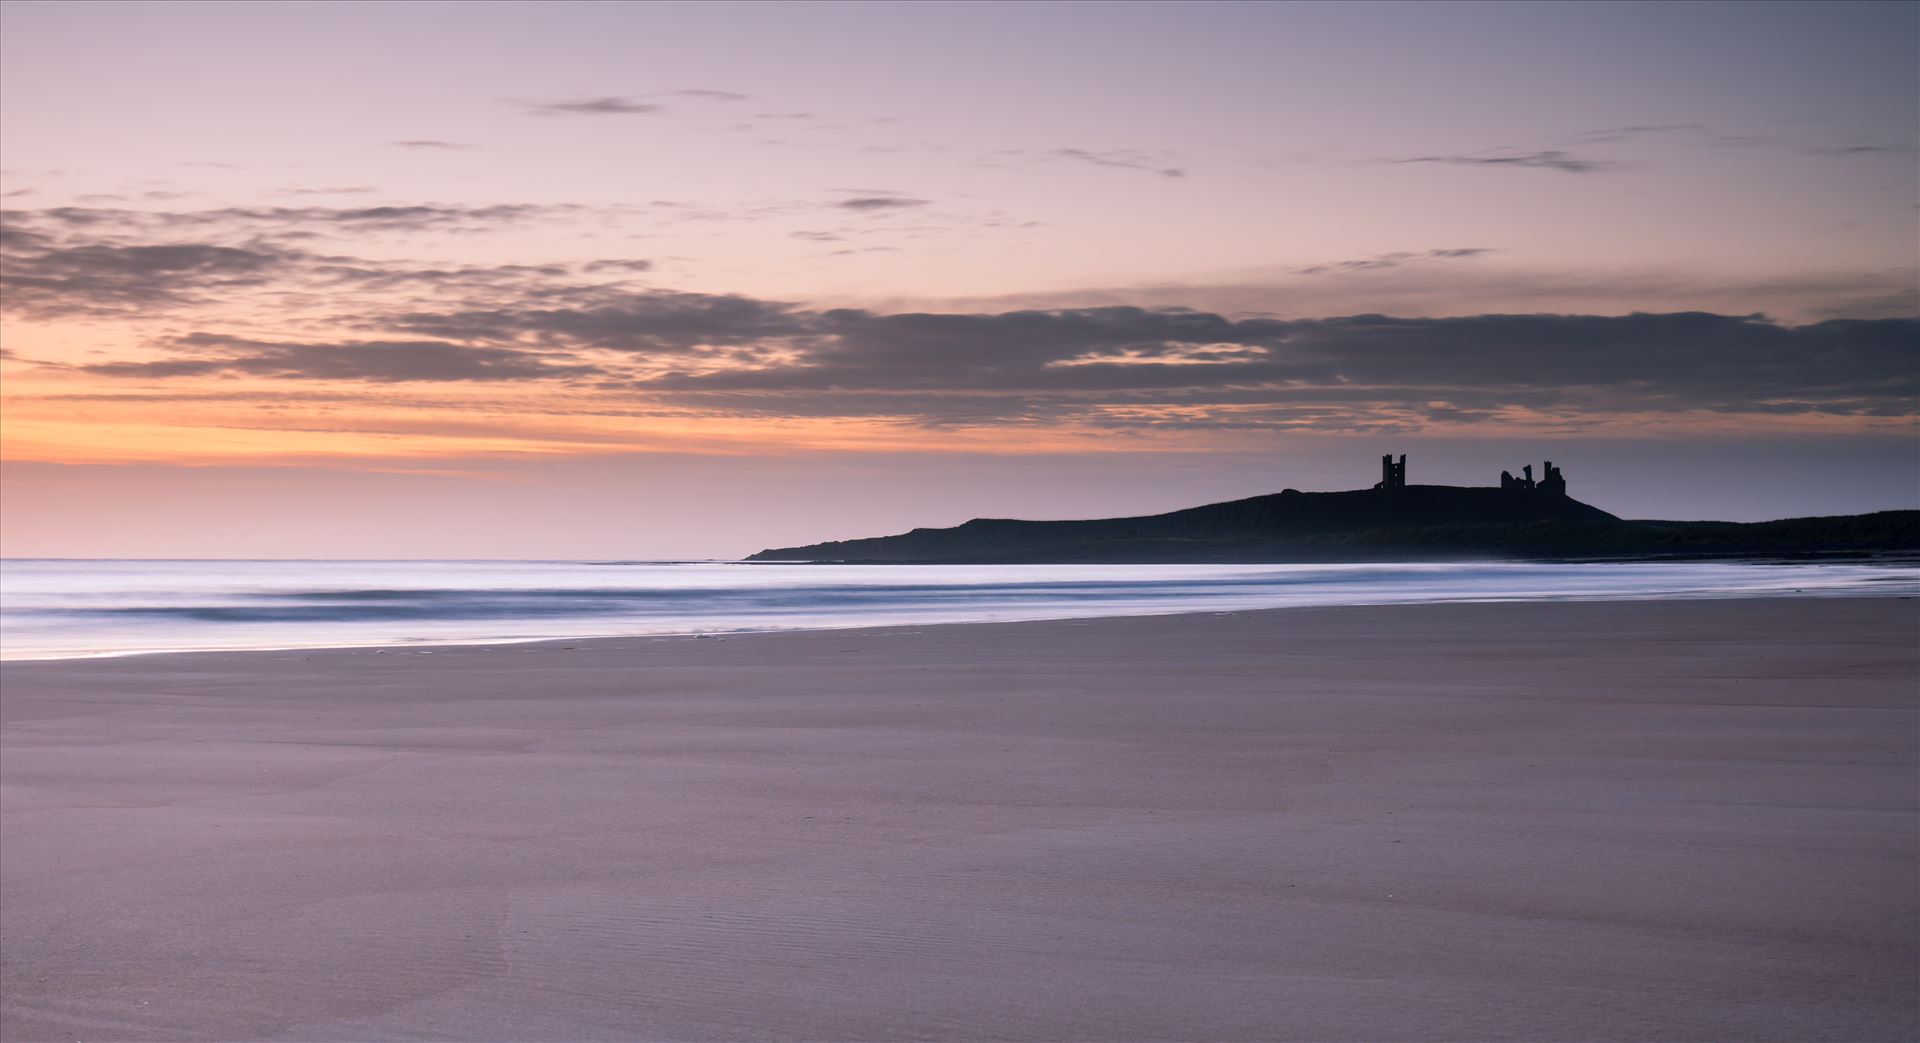 Sunrise at Embleton Bay, Northumberland - Embleton Bay is a bay on the North Sea, located to the east of the village of Embleton, Northumberland, England. It lies just to the south of Newton-by-the-Sea and north of Craster by philreay